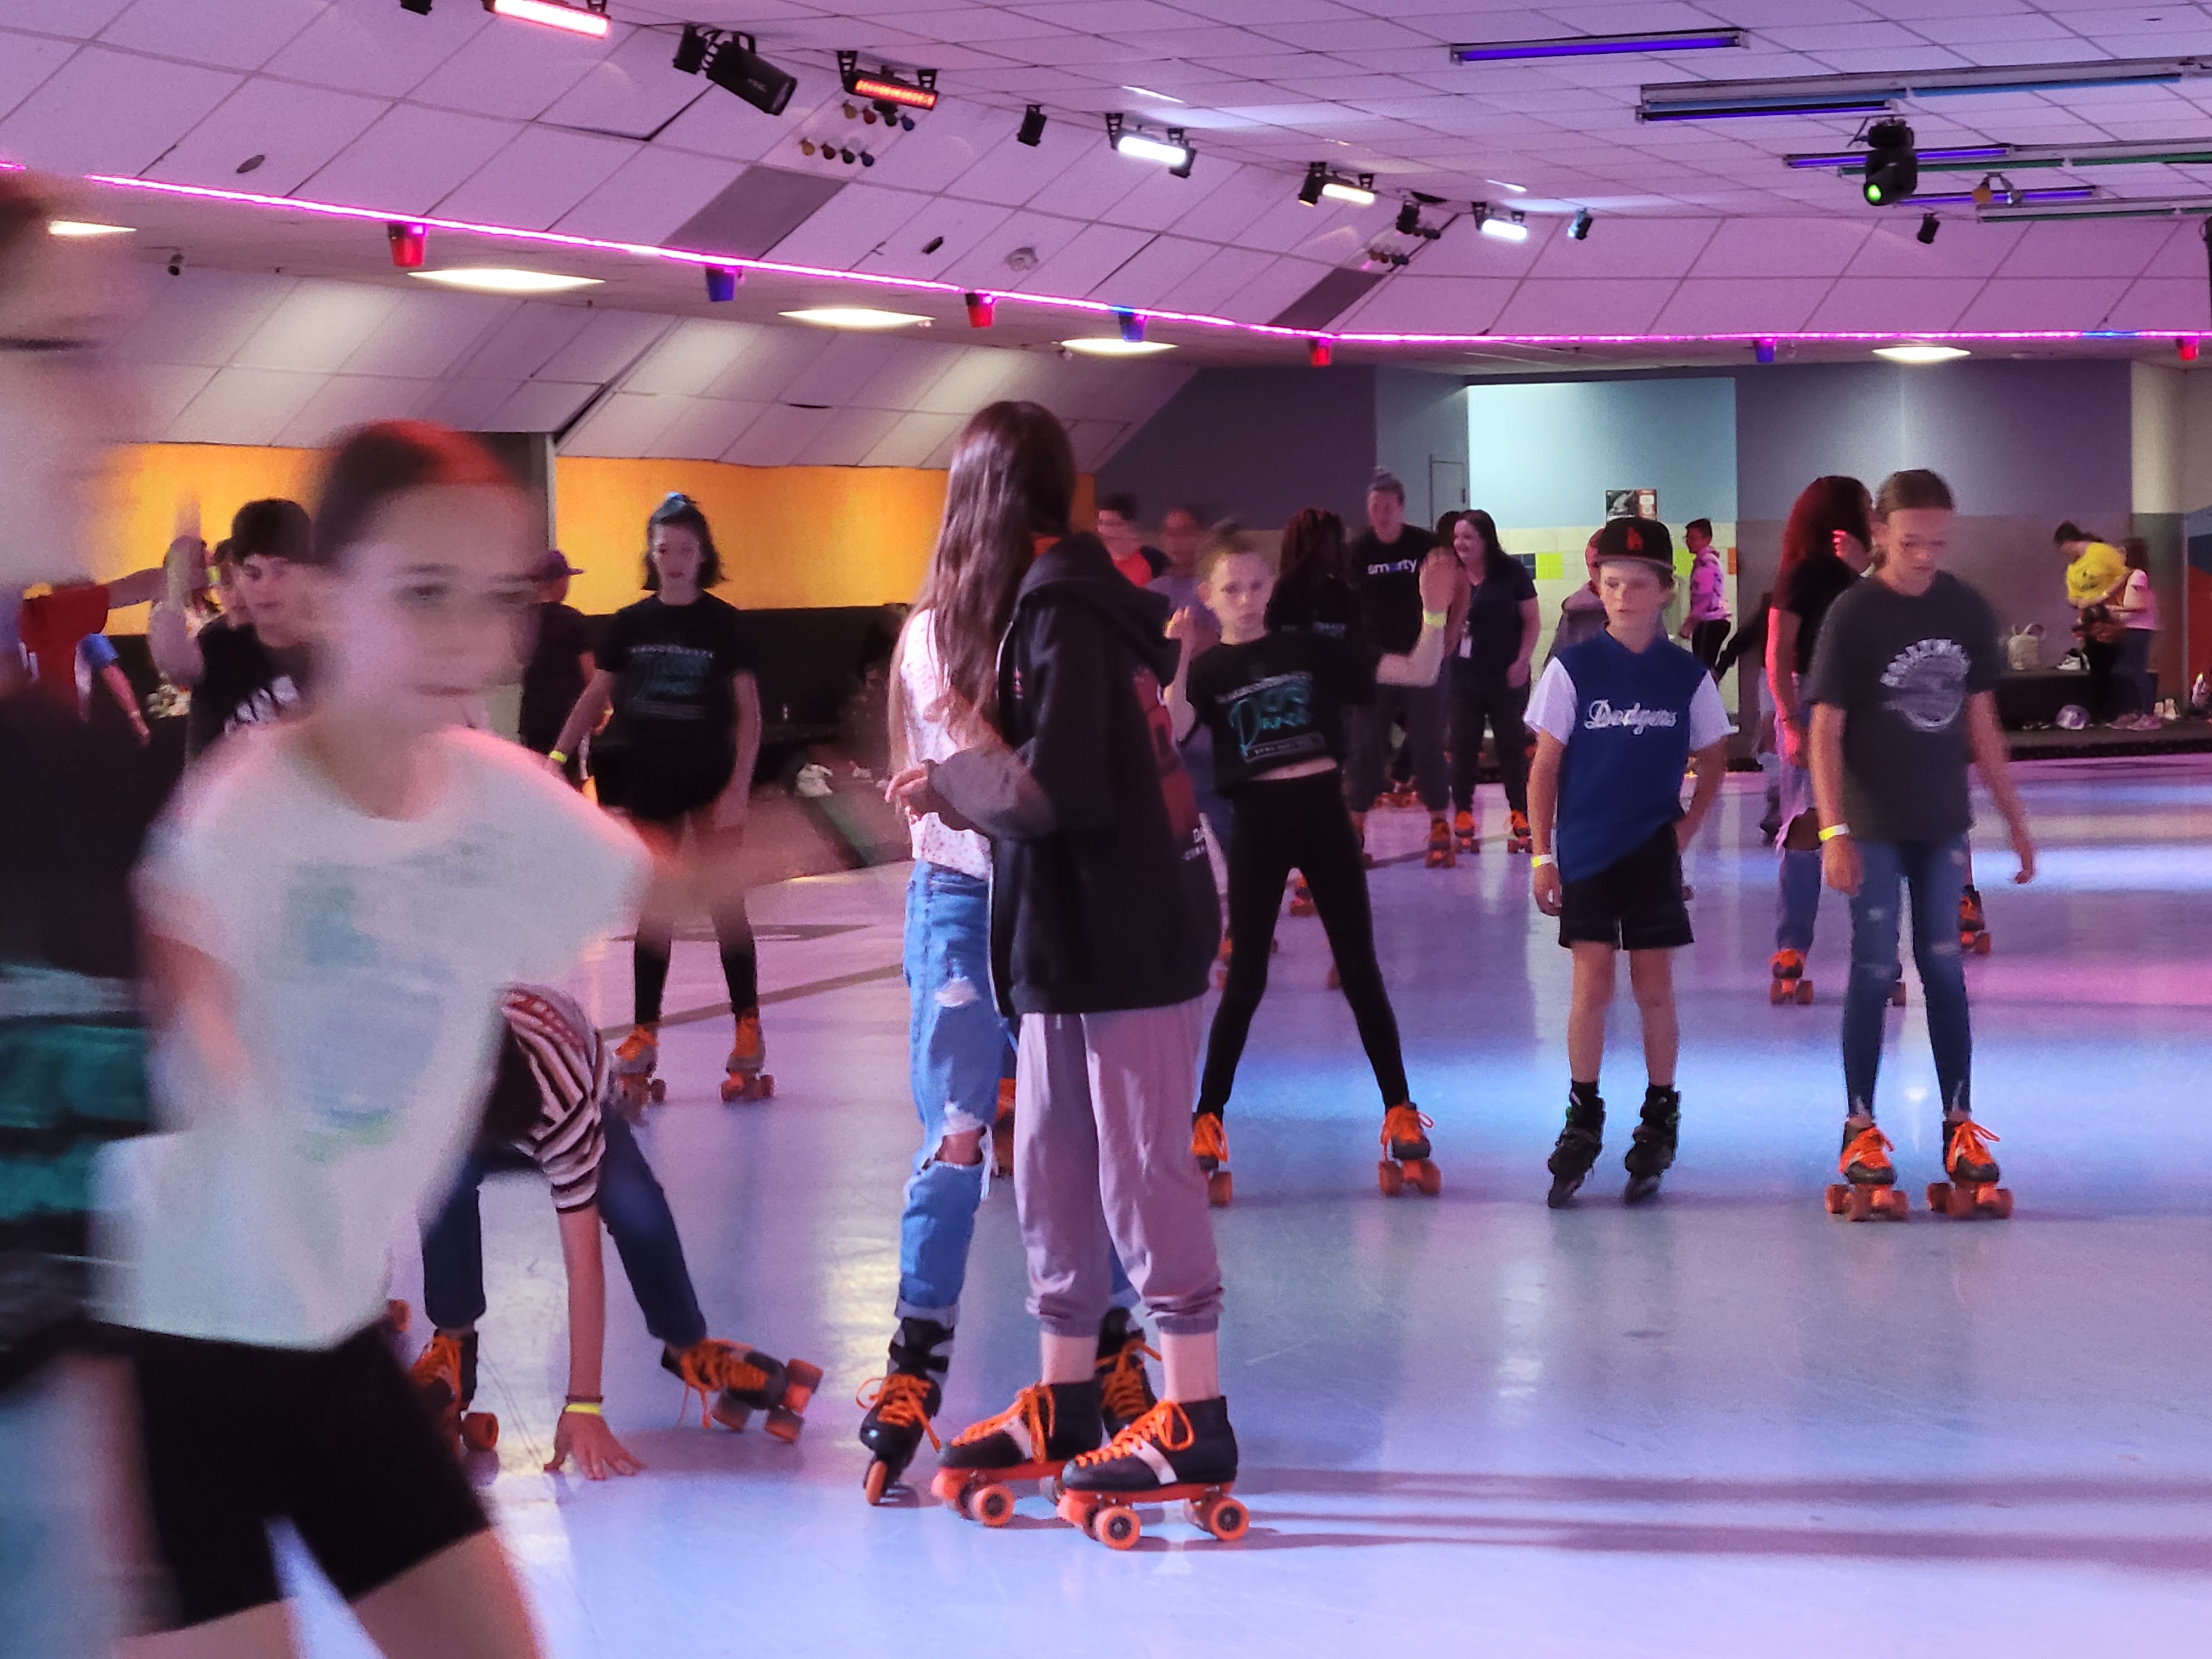 Students have fun at Classic Skate